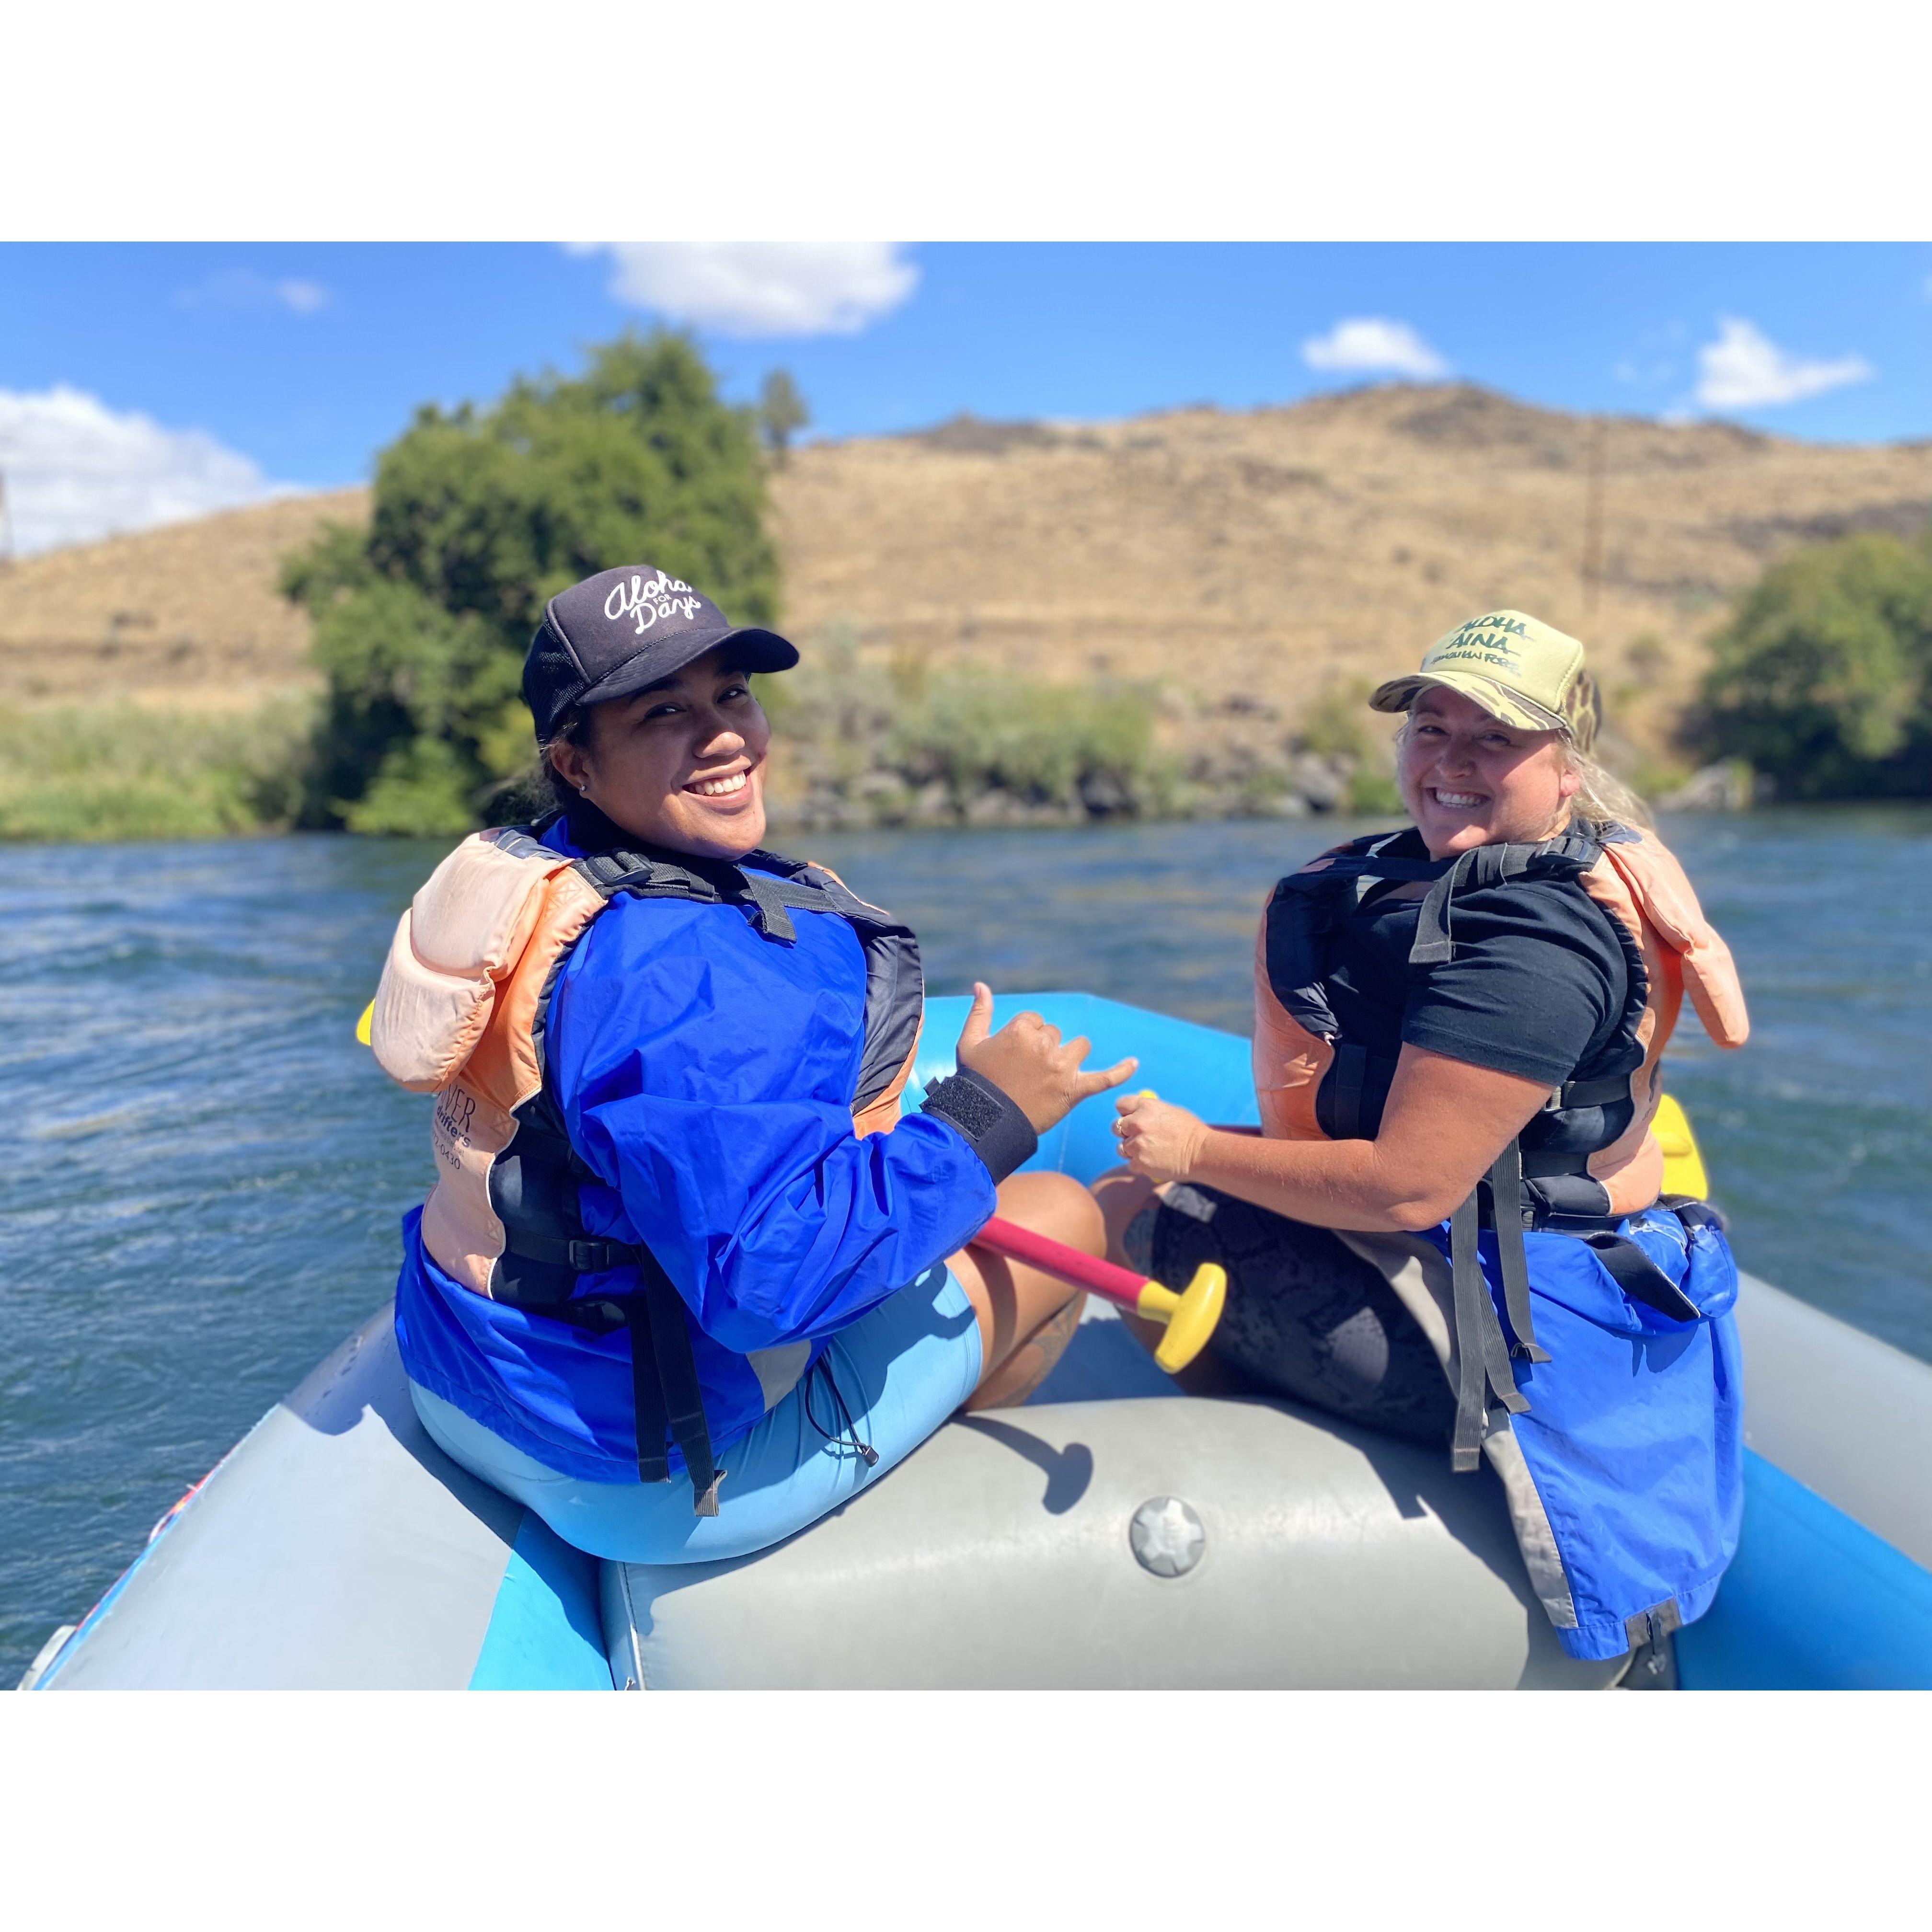 White water rafting down the Deschutes River, Oregon